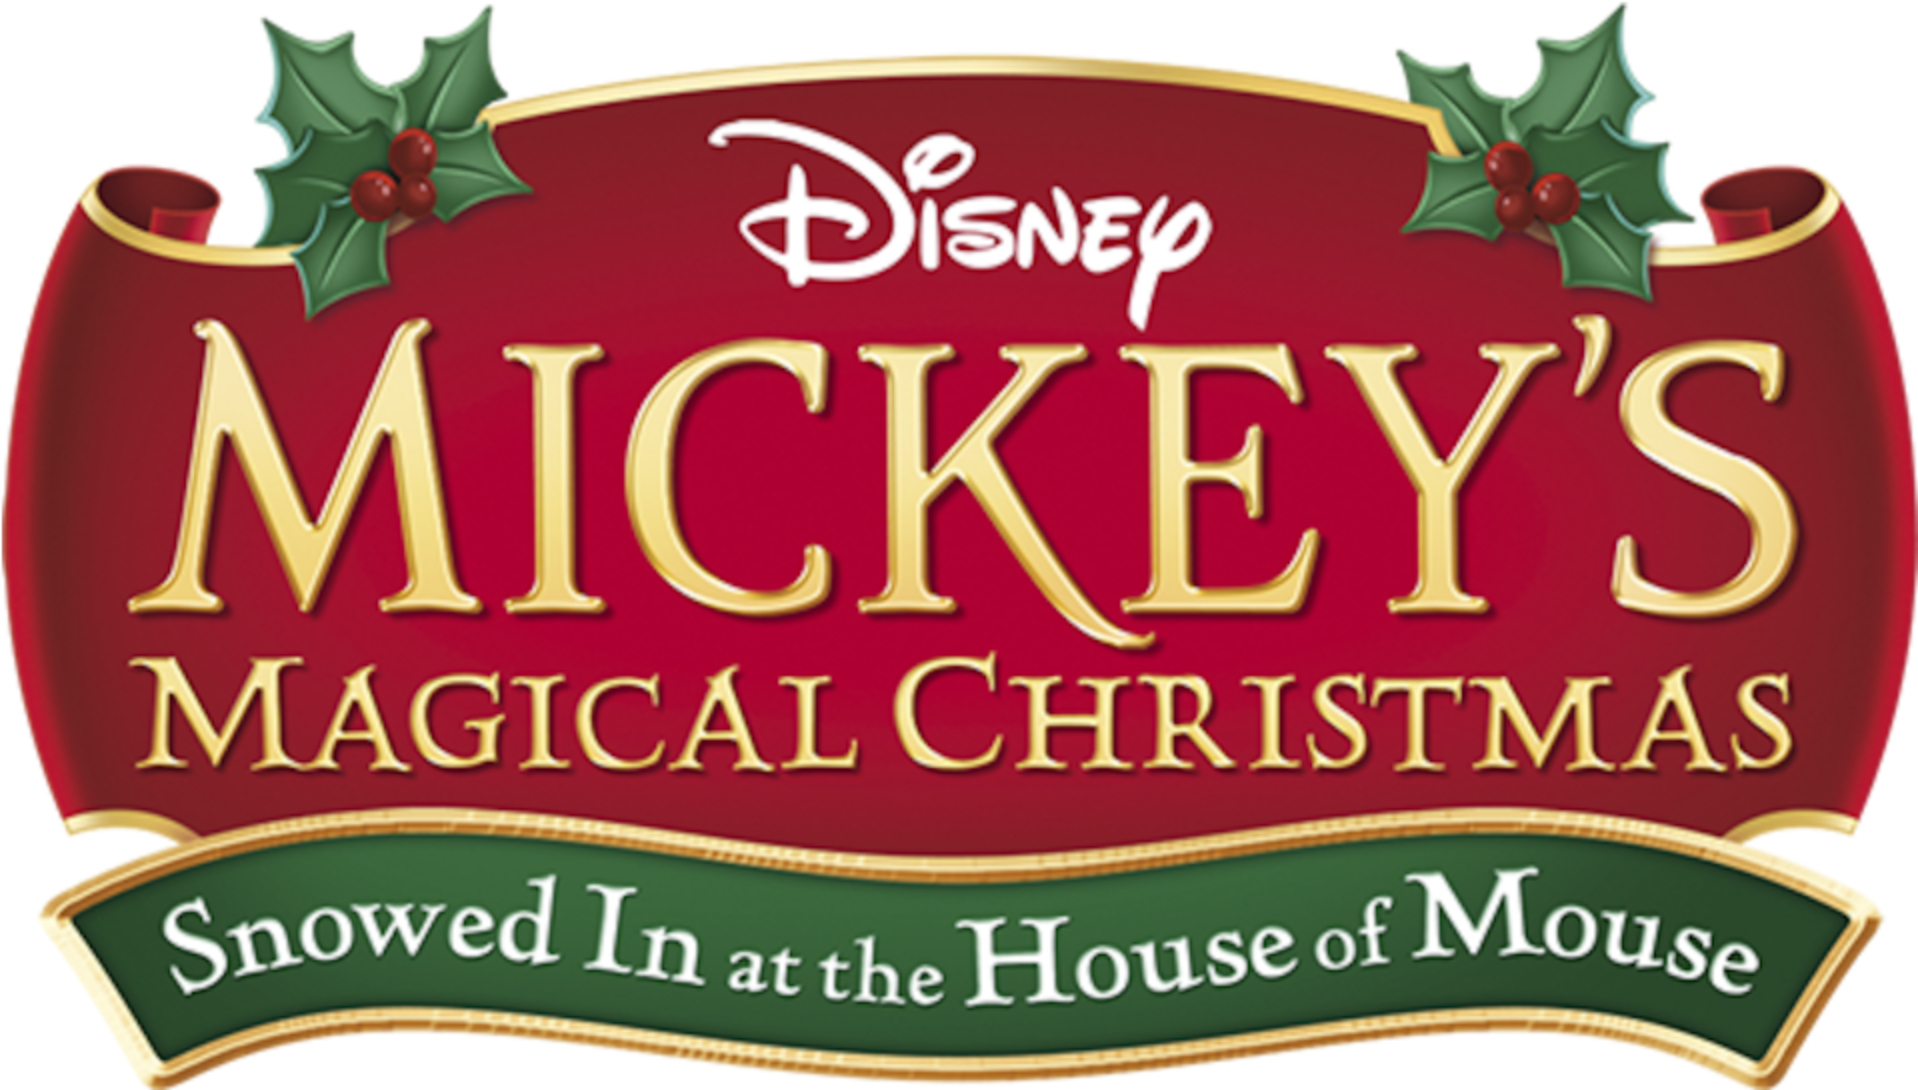 Mickey's Magical Christmas: Snowed in at the House of Mouse (1 DVD Box Set)